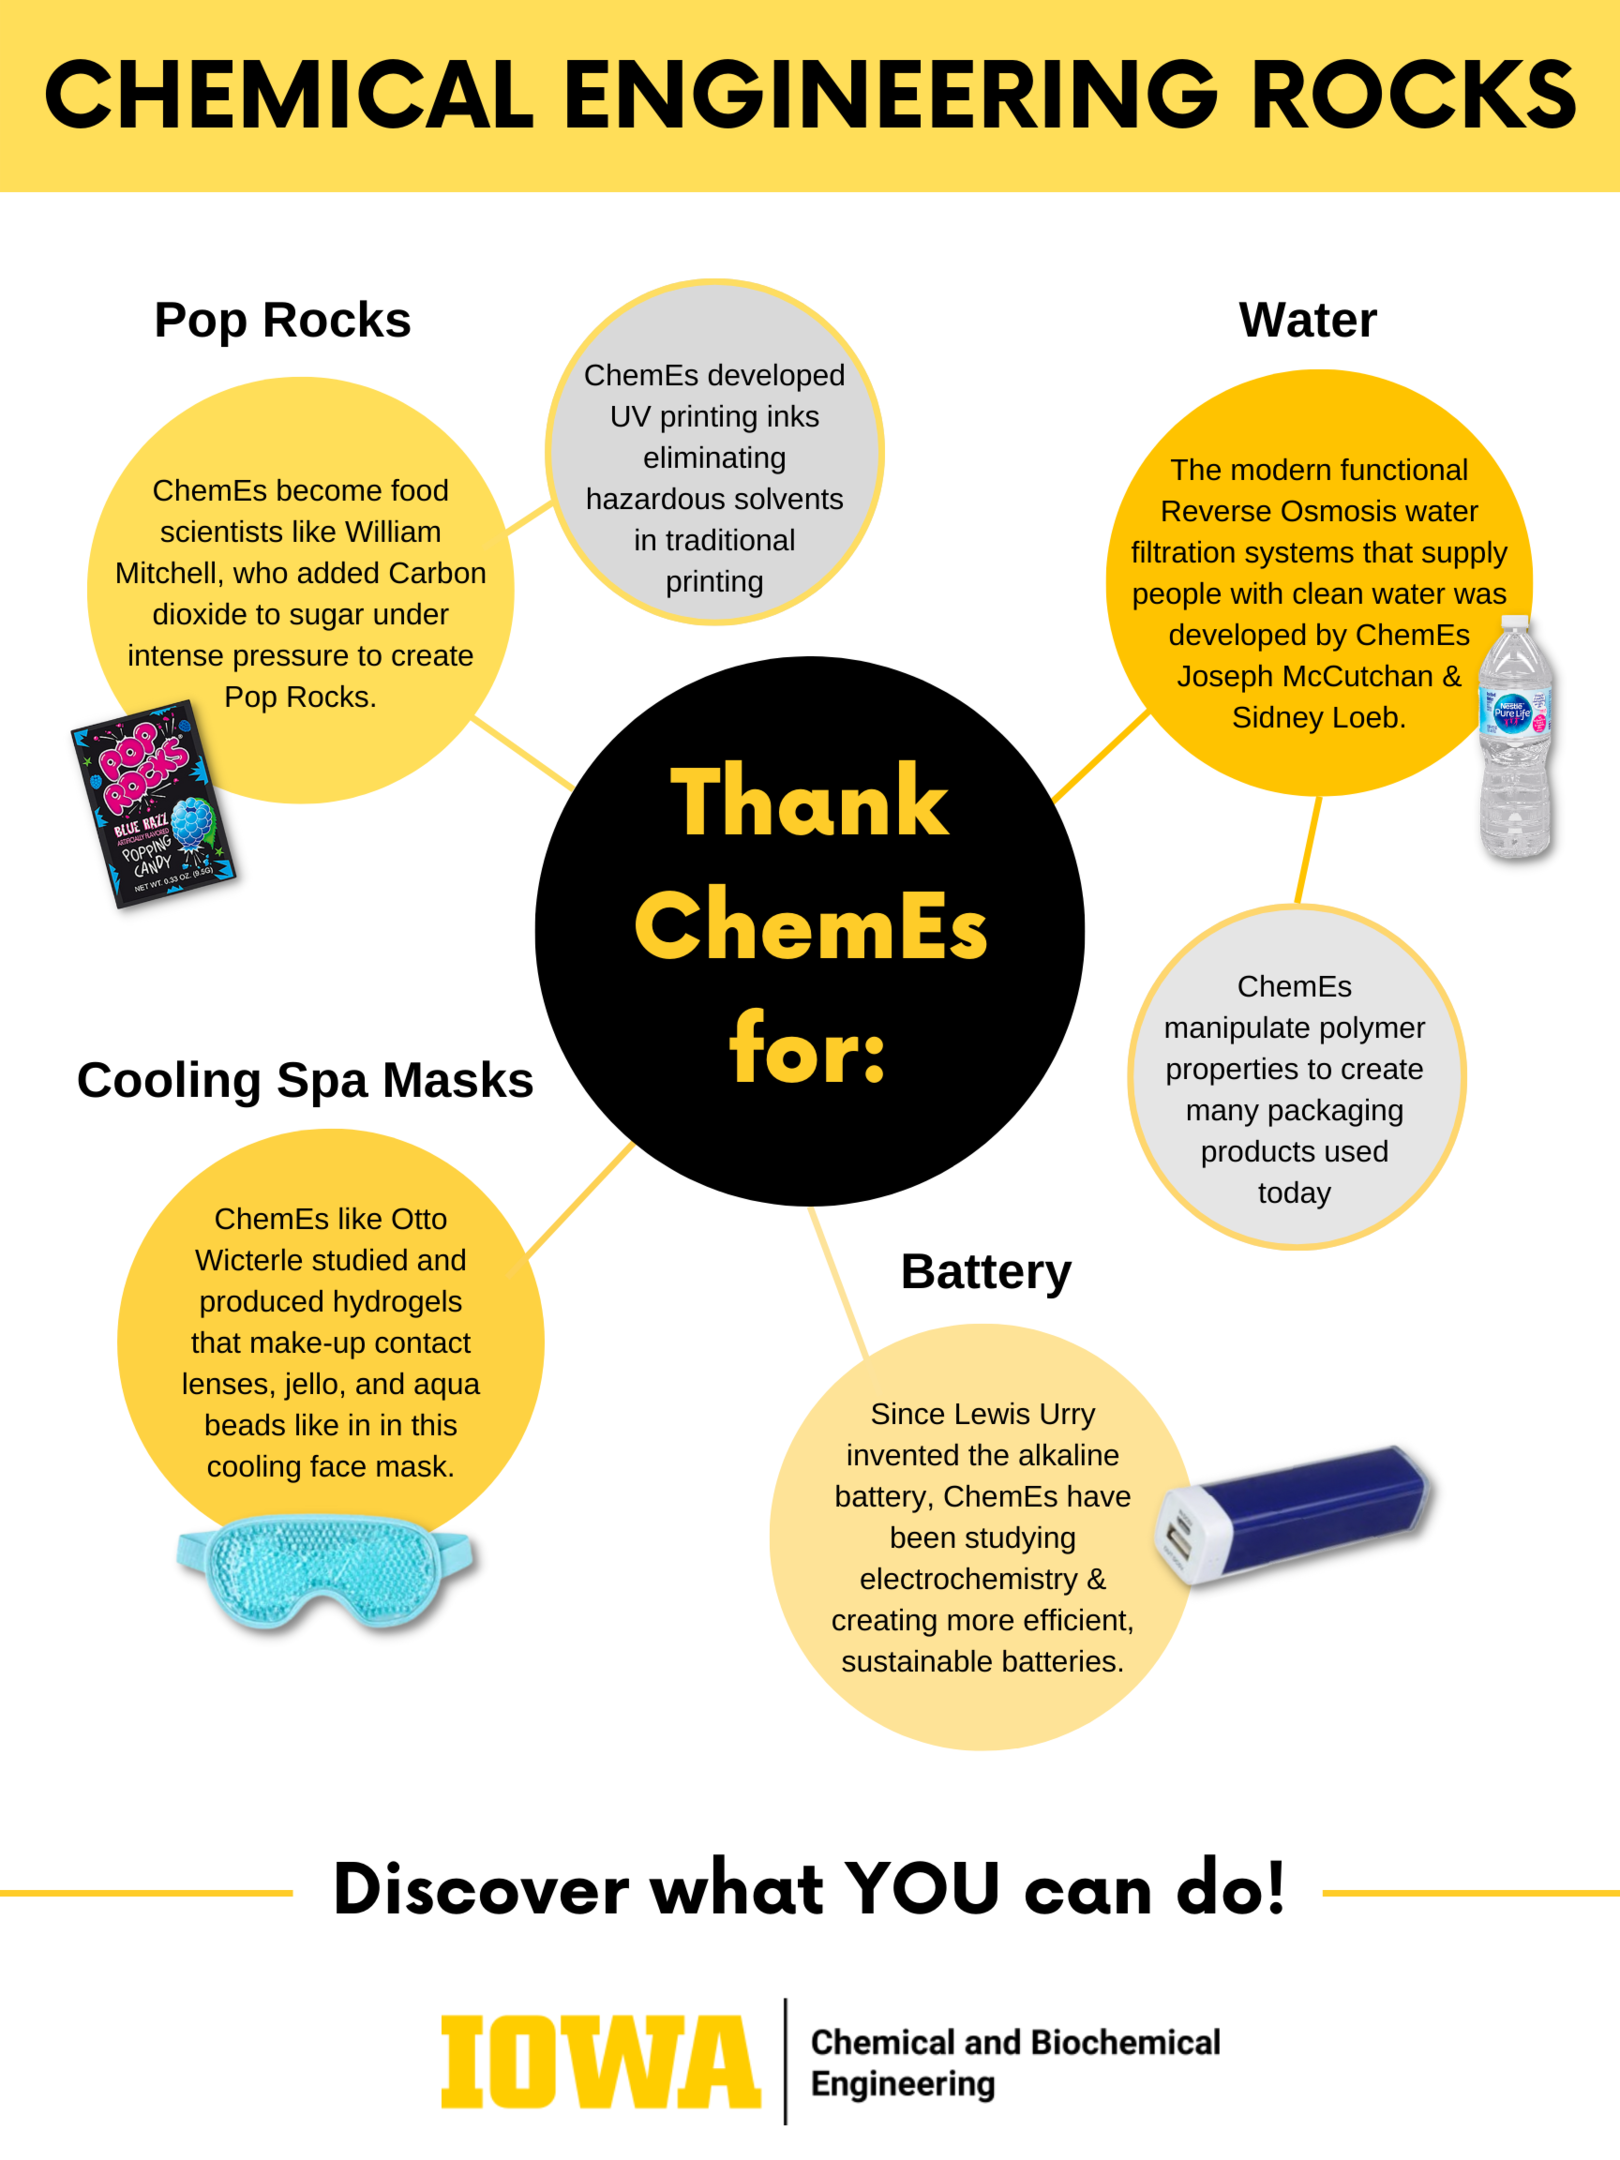 Thank ChemEs for: pop rocks, water, cooling spa masks and batteries.